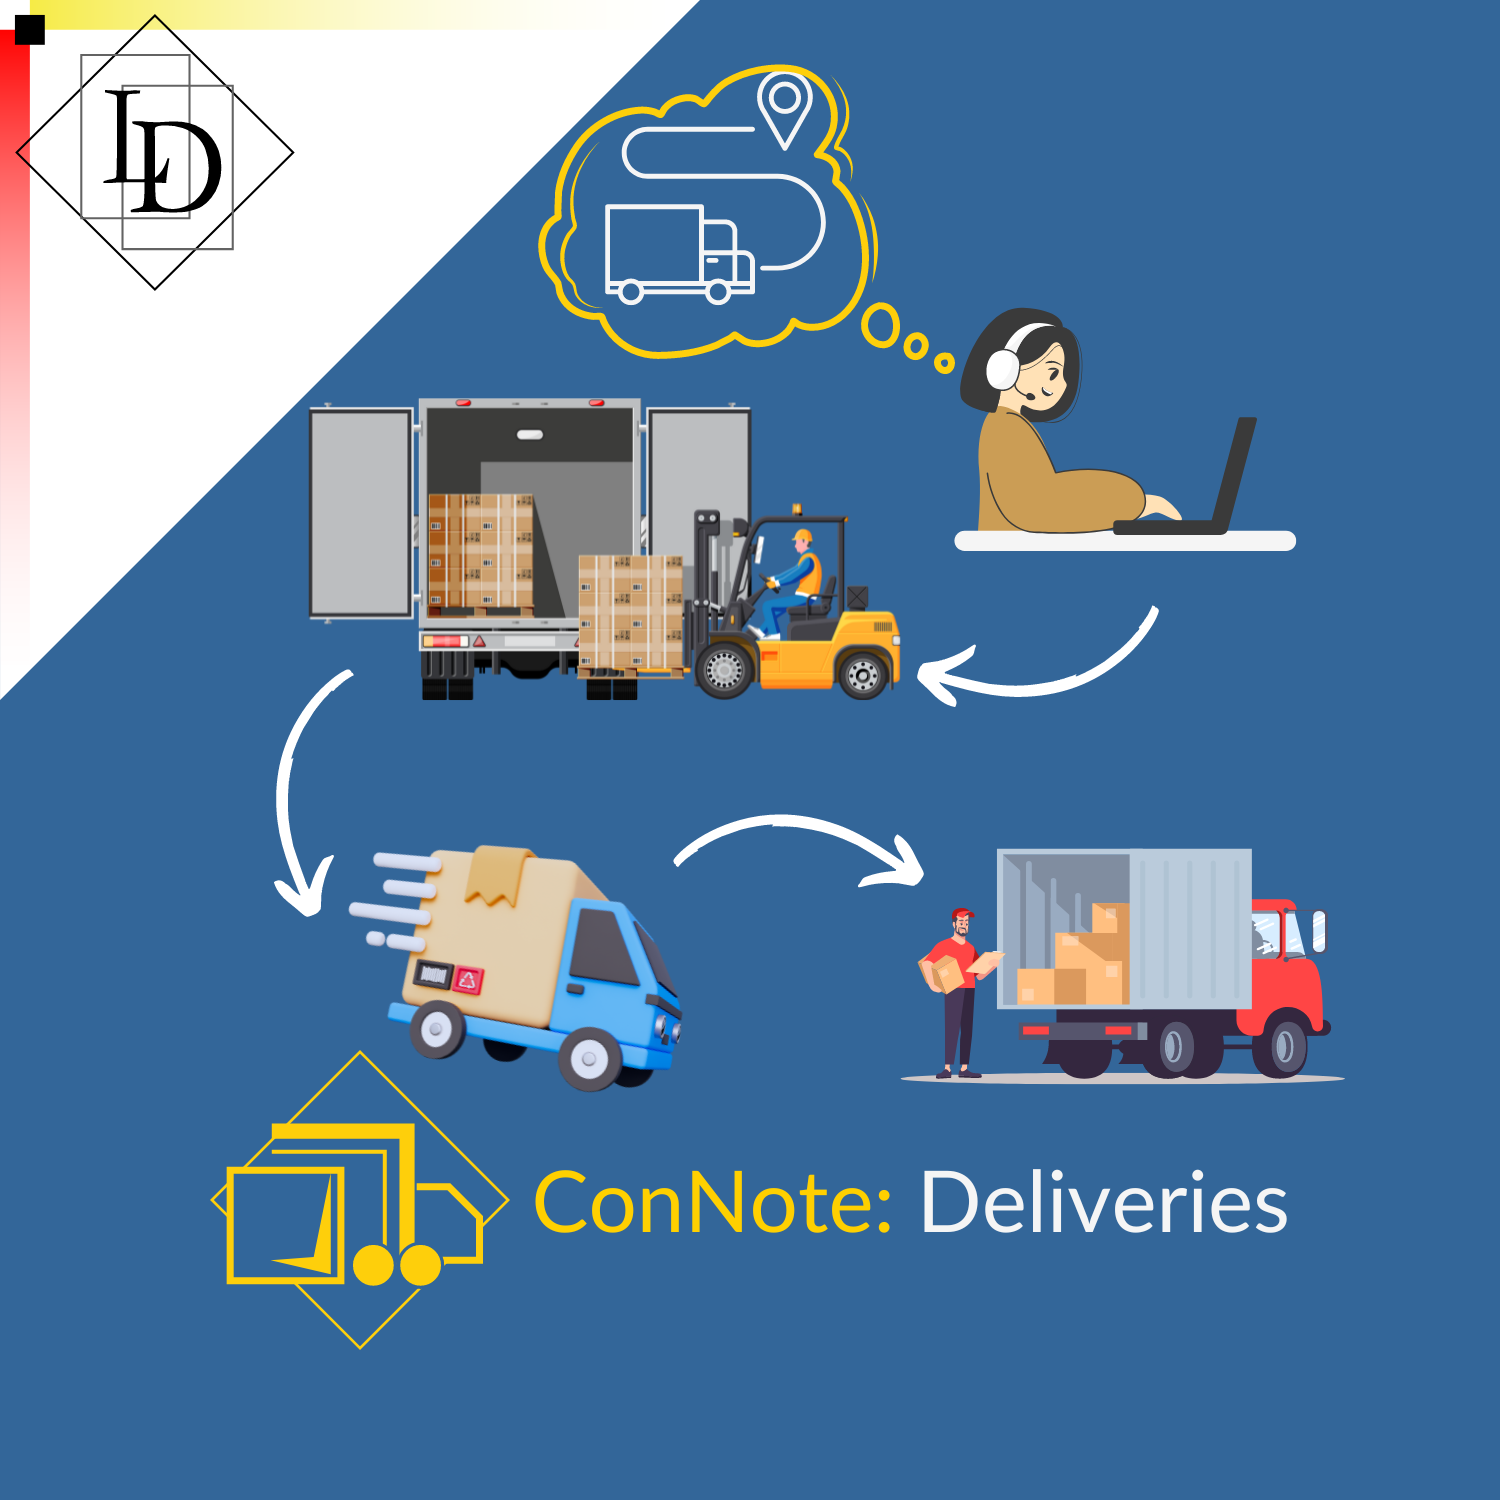 The image has a blue background, several graphics descriptive of the freight delivery process, and is captioned with the ConNote logo and text reading "ConNote: Deliveries"